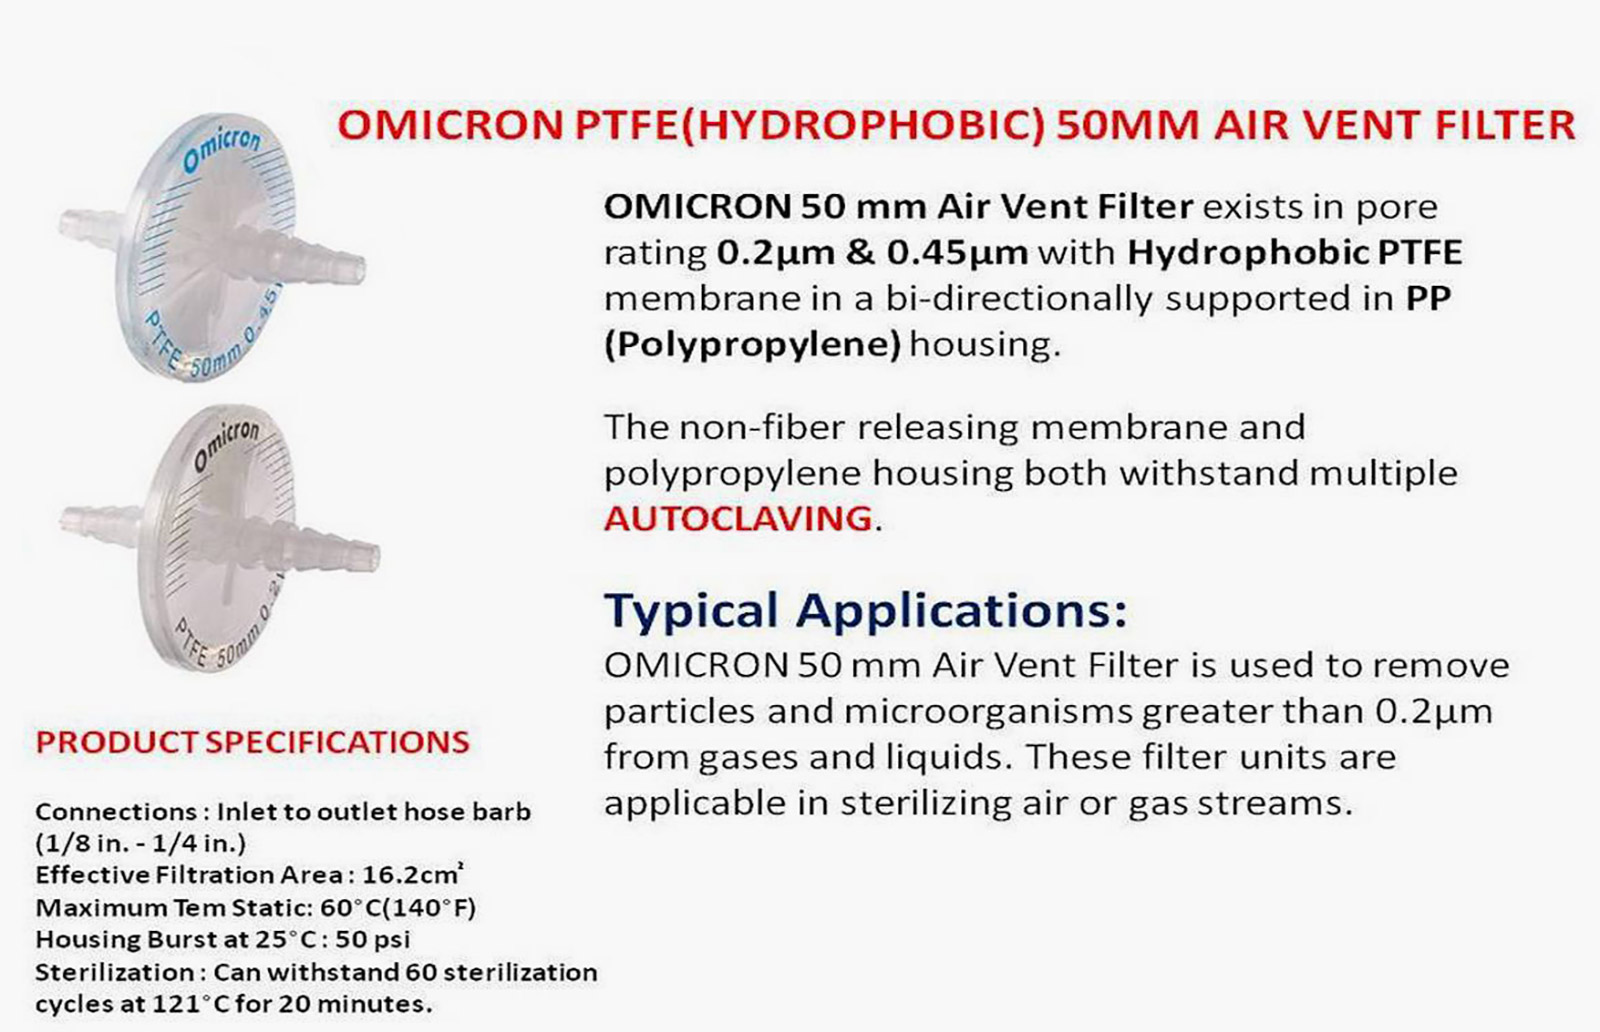 OMICRON PTFE HYDROPHOBIC 50MM AIR VENT FILTER